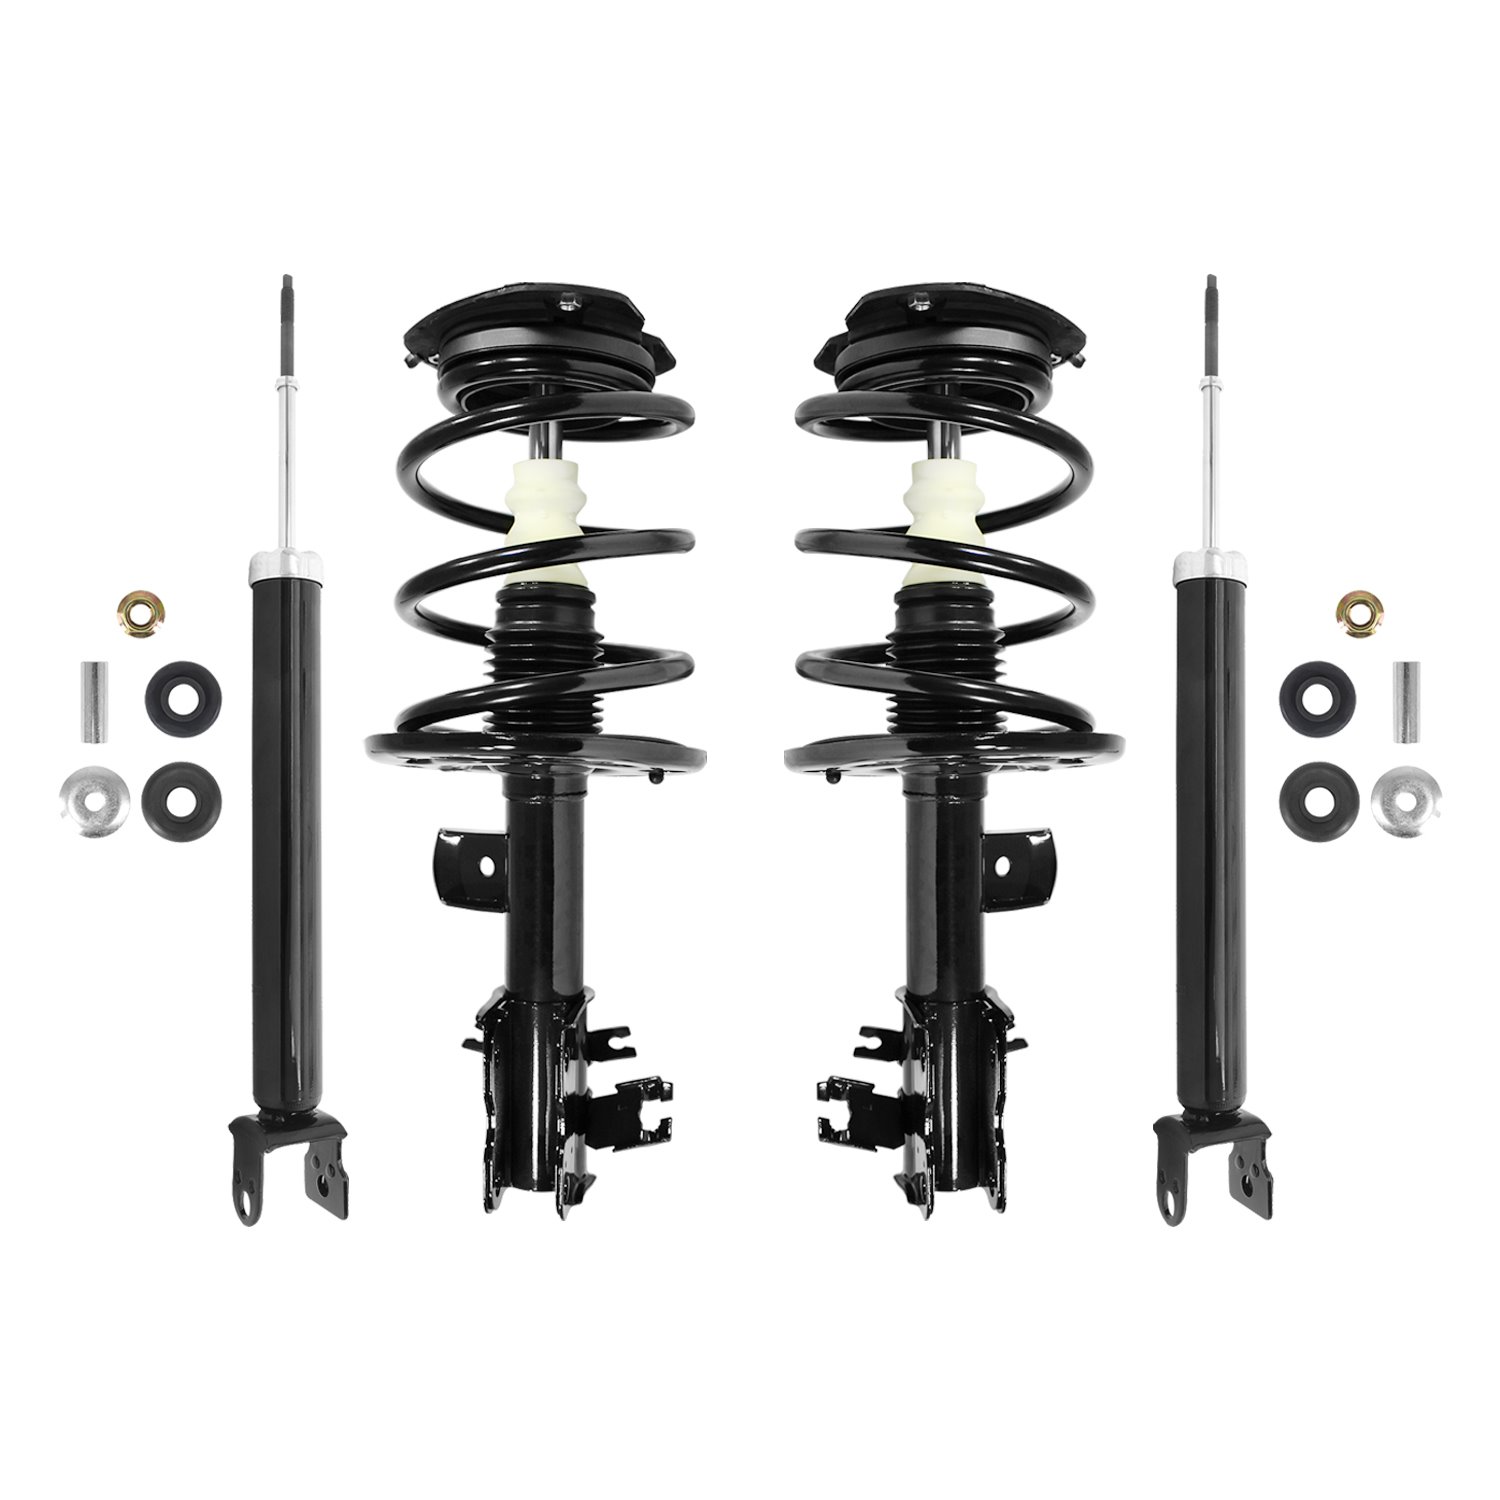 4-11595-255030-001 Front & Rear Suspension Strut & Coil Spring Assembly Fits Select Nissan Altima